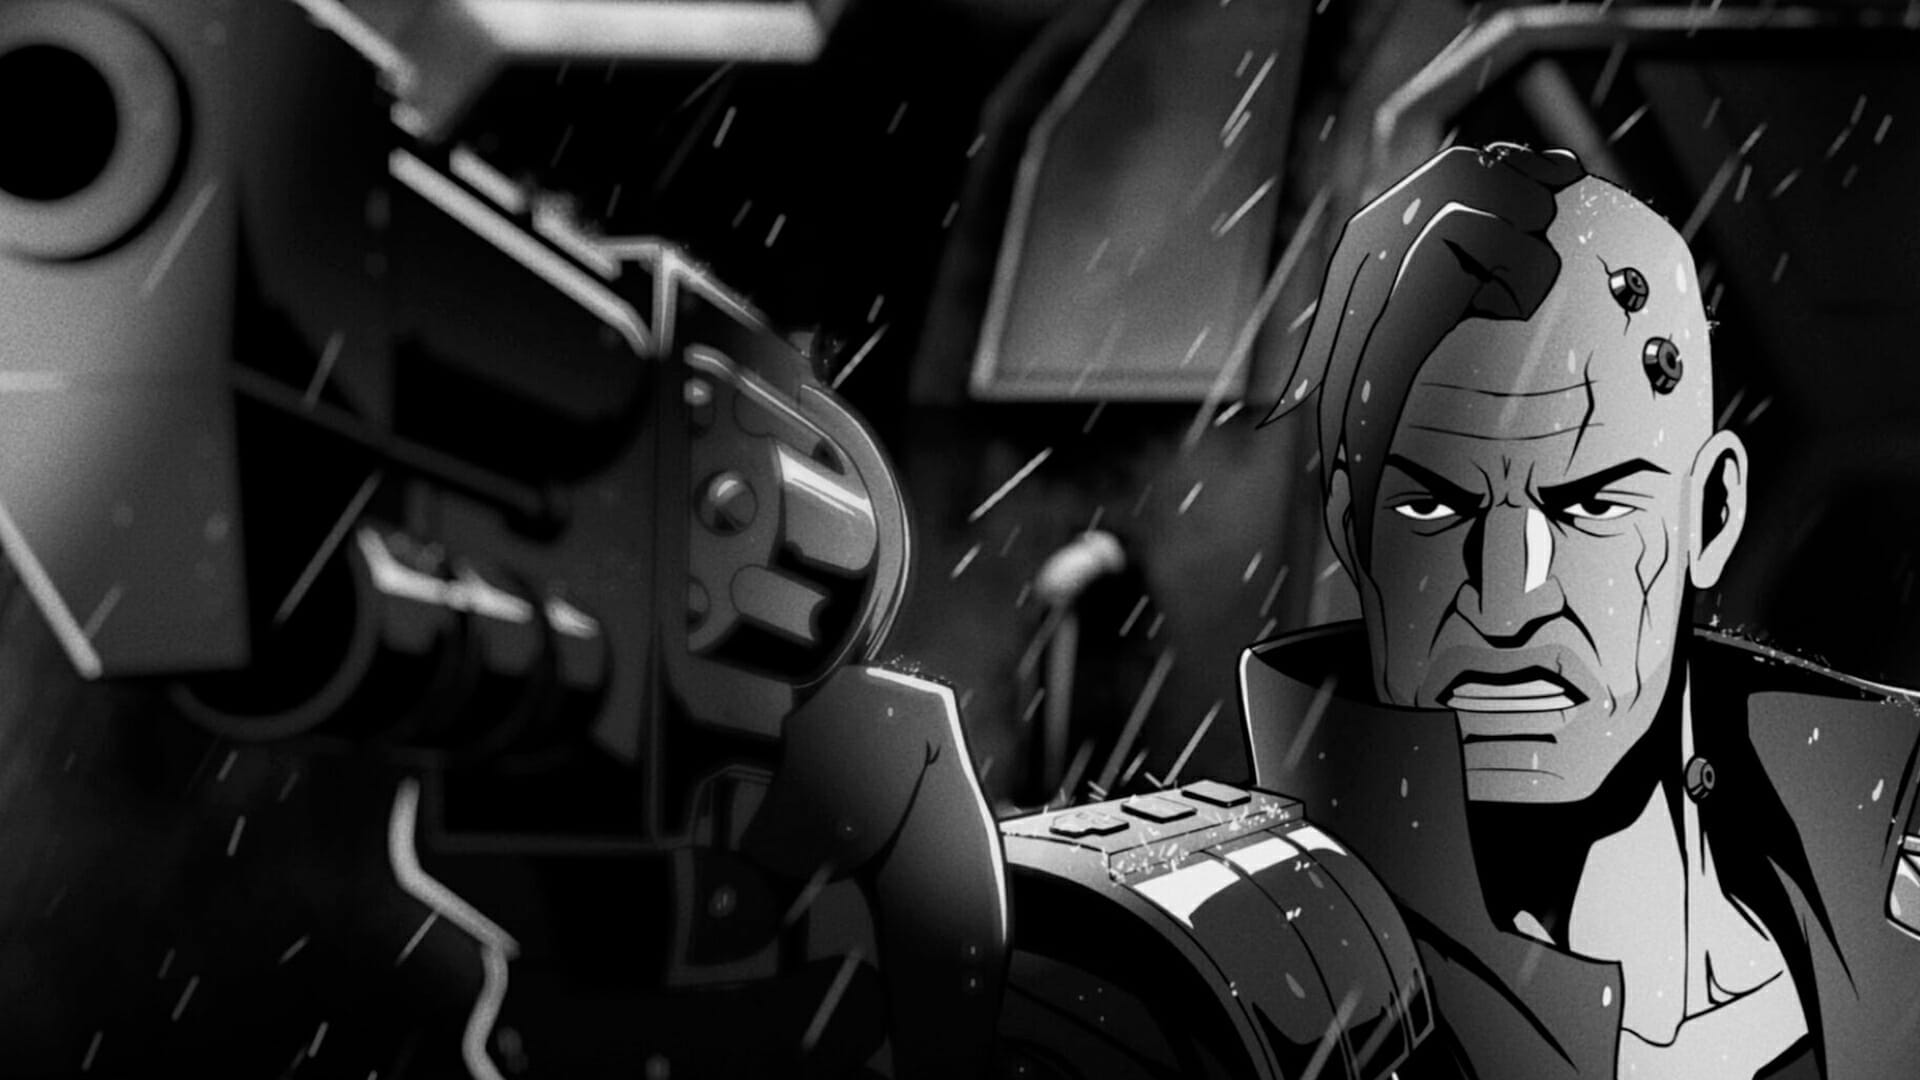 Banner for "M2 ANIMATION", an award-winning script-to-screen studio. Showcases the noir animated series "WARHAMMER INTERROGATOR". Features close-up grayscale graphics of robotic elements, rain, and an intense-looking animated male character with cybernetic enhancements on his bald head. Strong contrasts with a dark background. The style is bold and dramatic.